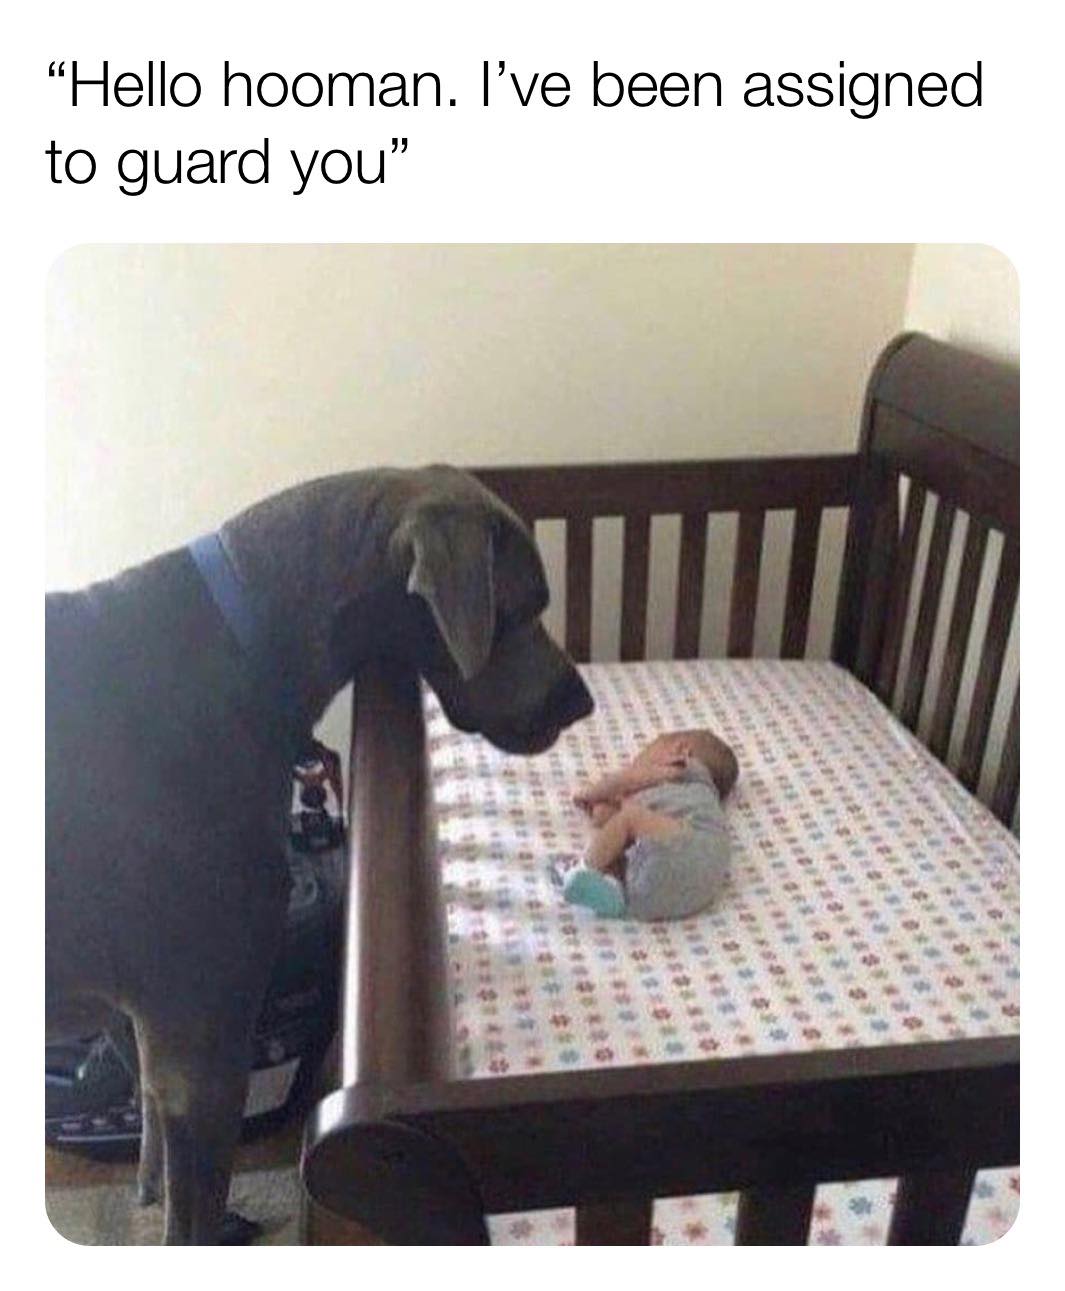 hello hooman i ve been assigned to guard you - "Hello hooman. I've been assigned to guard you"